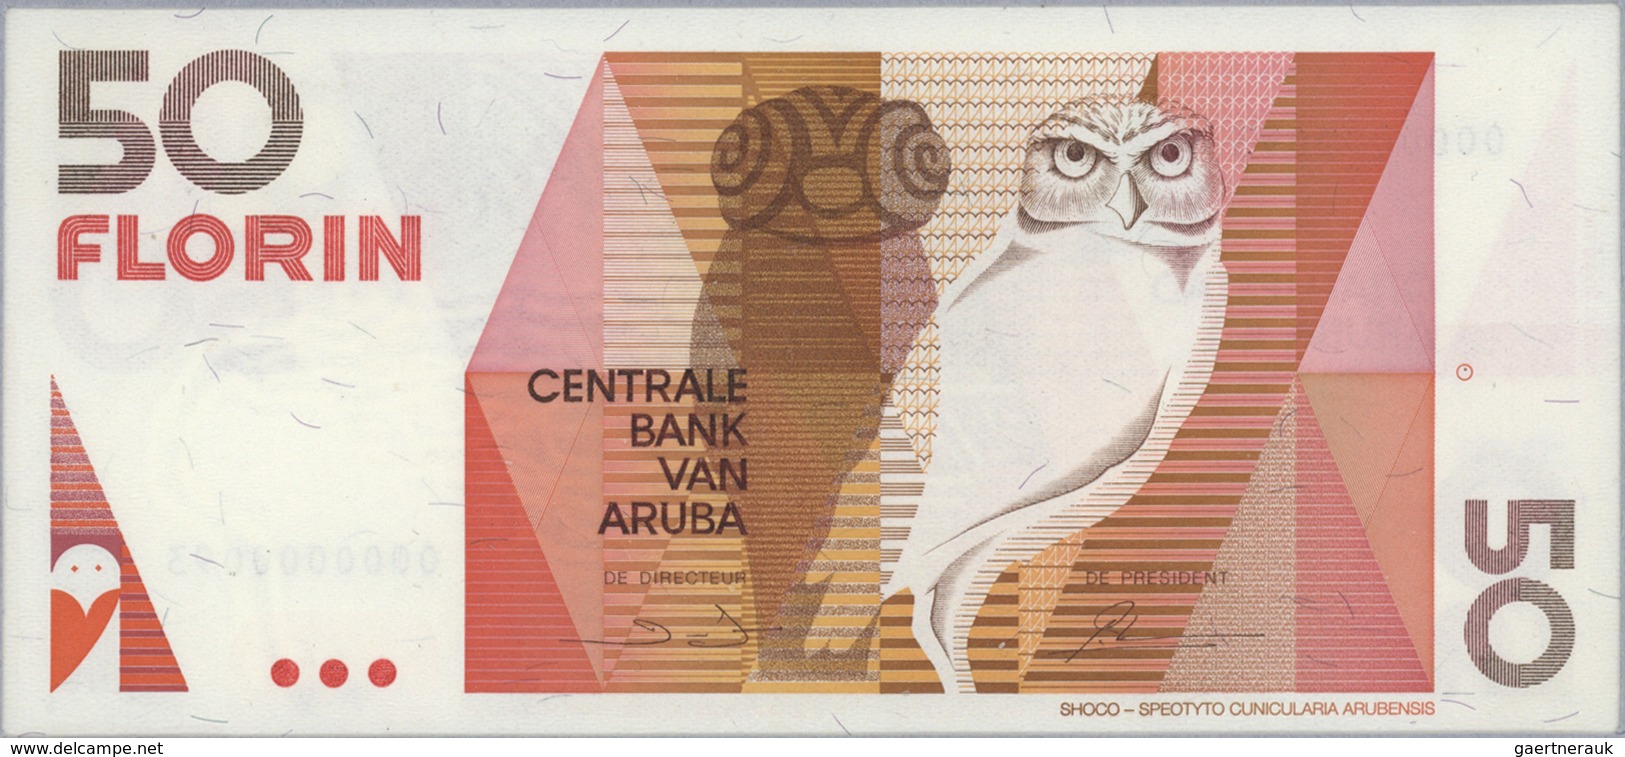 Aruba: official collectors book issued by the Central Bank of Aruba commemorating the first Banknote